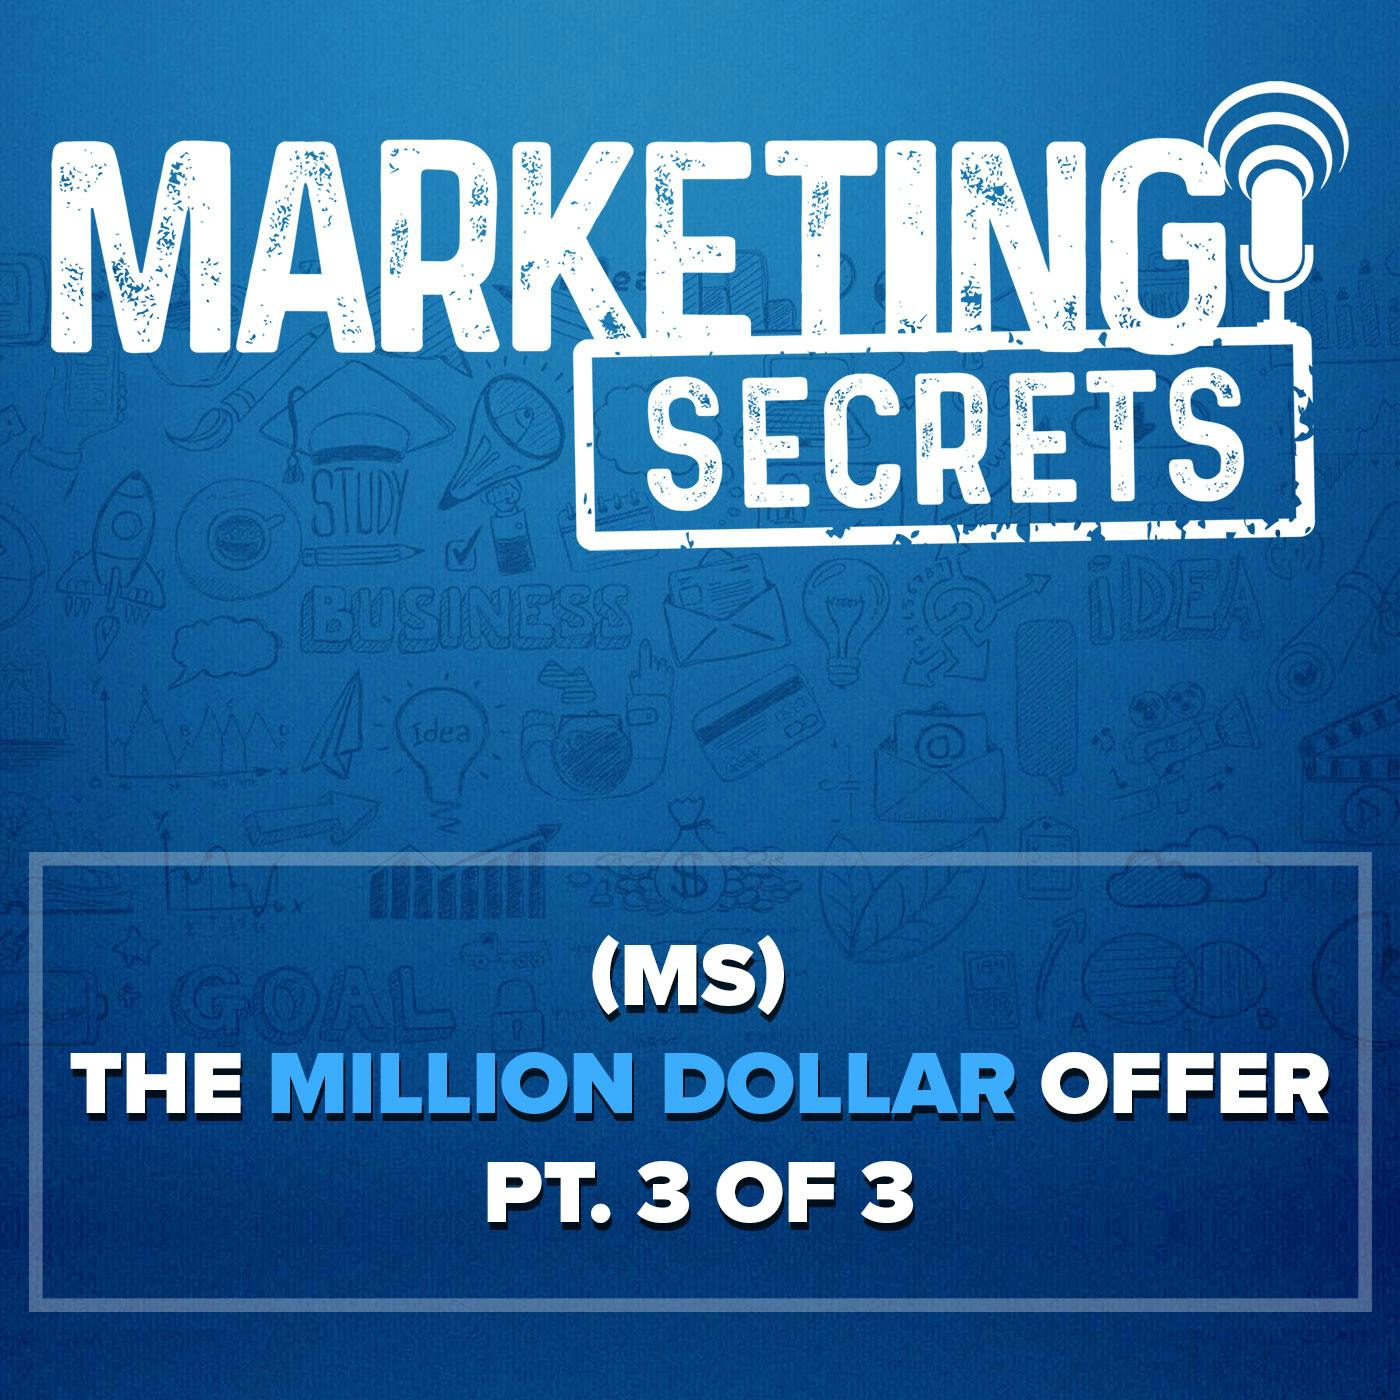 (MS) The Million Dollar Offer... (Part 3 of 3)